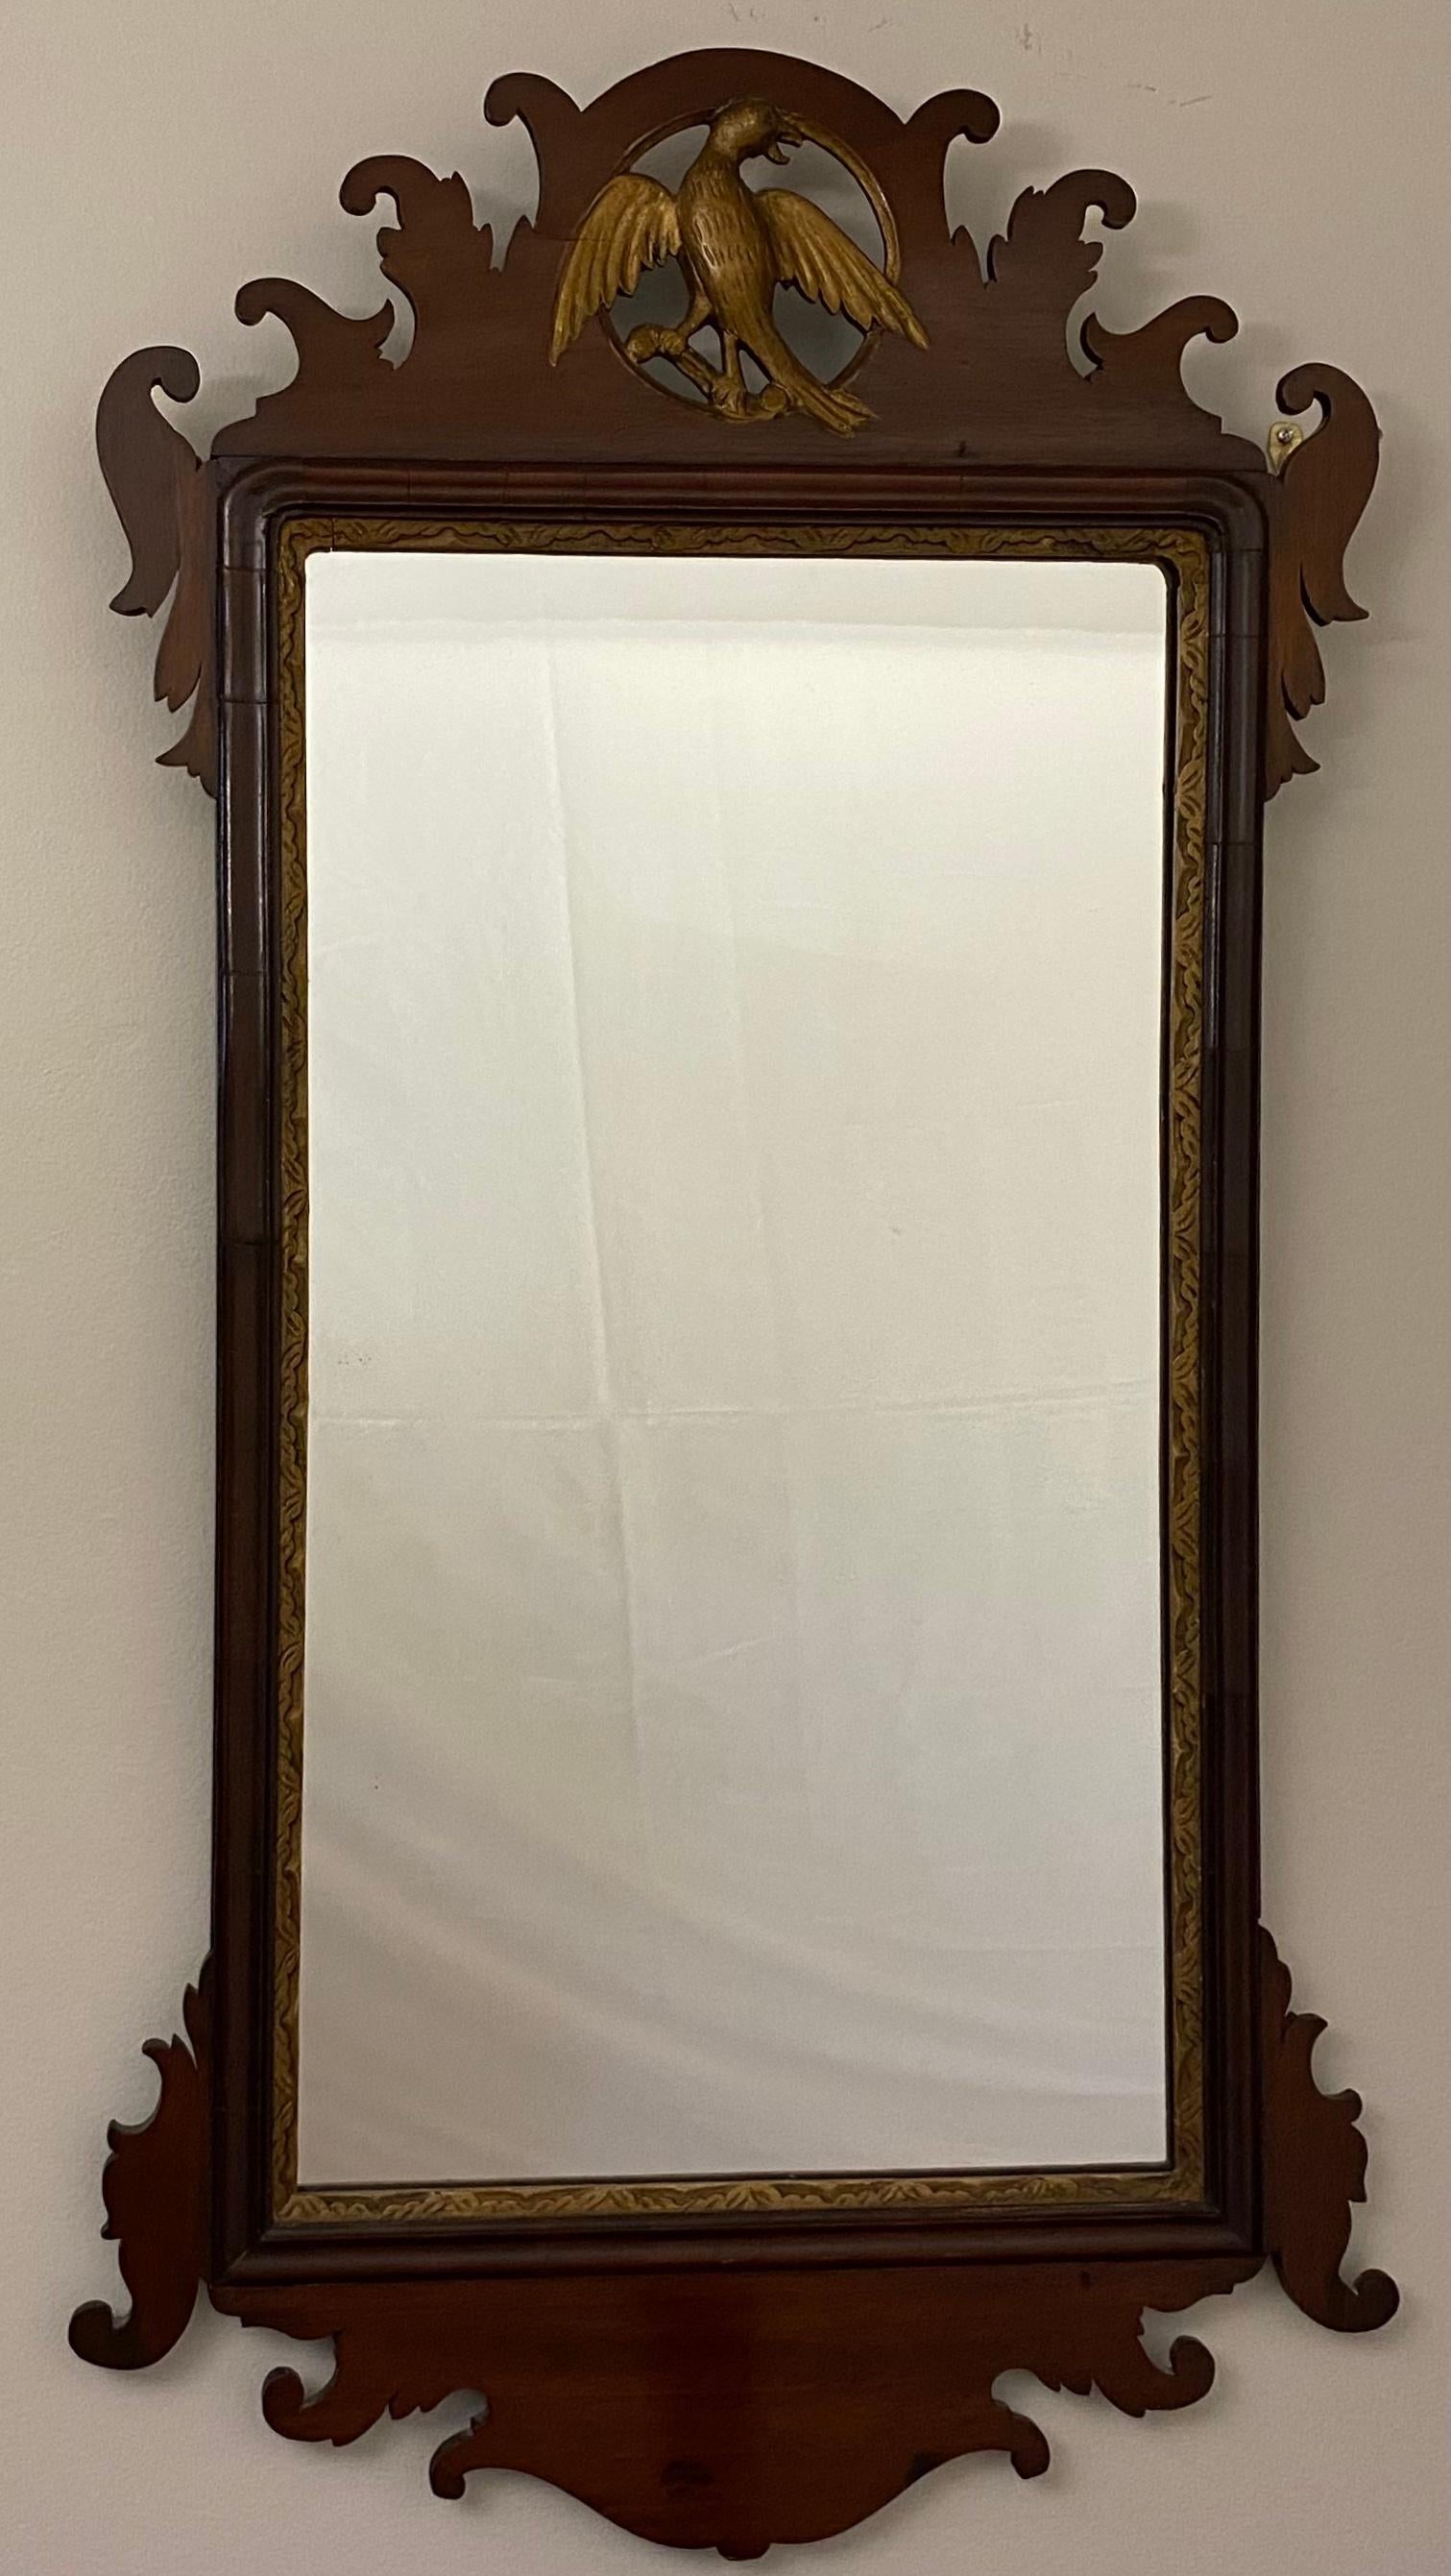 18th Century Early American Chippendale Style Wall Mirror with Eagle Pediment For Sale 4